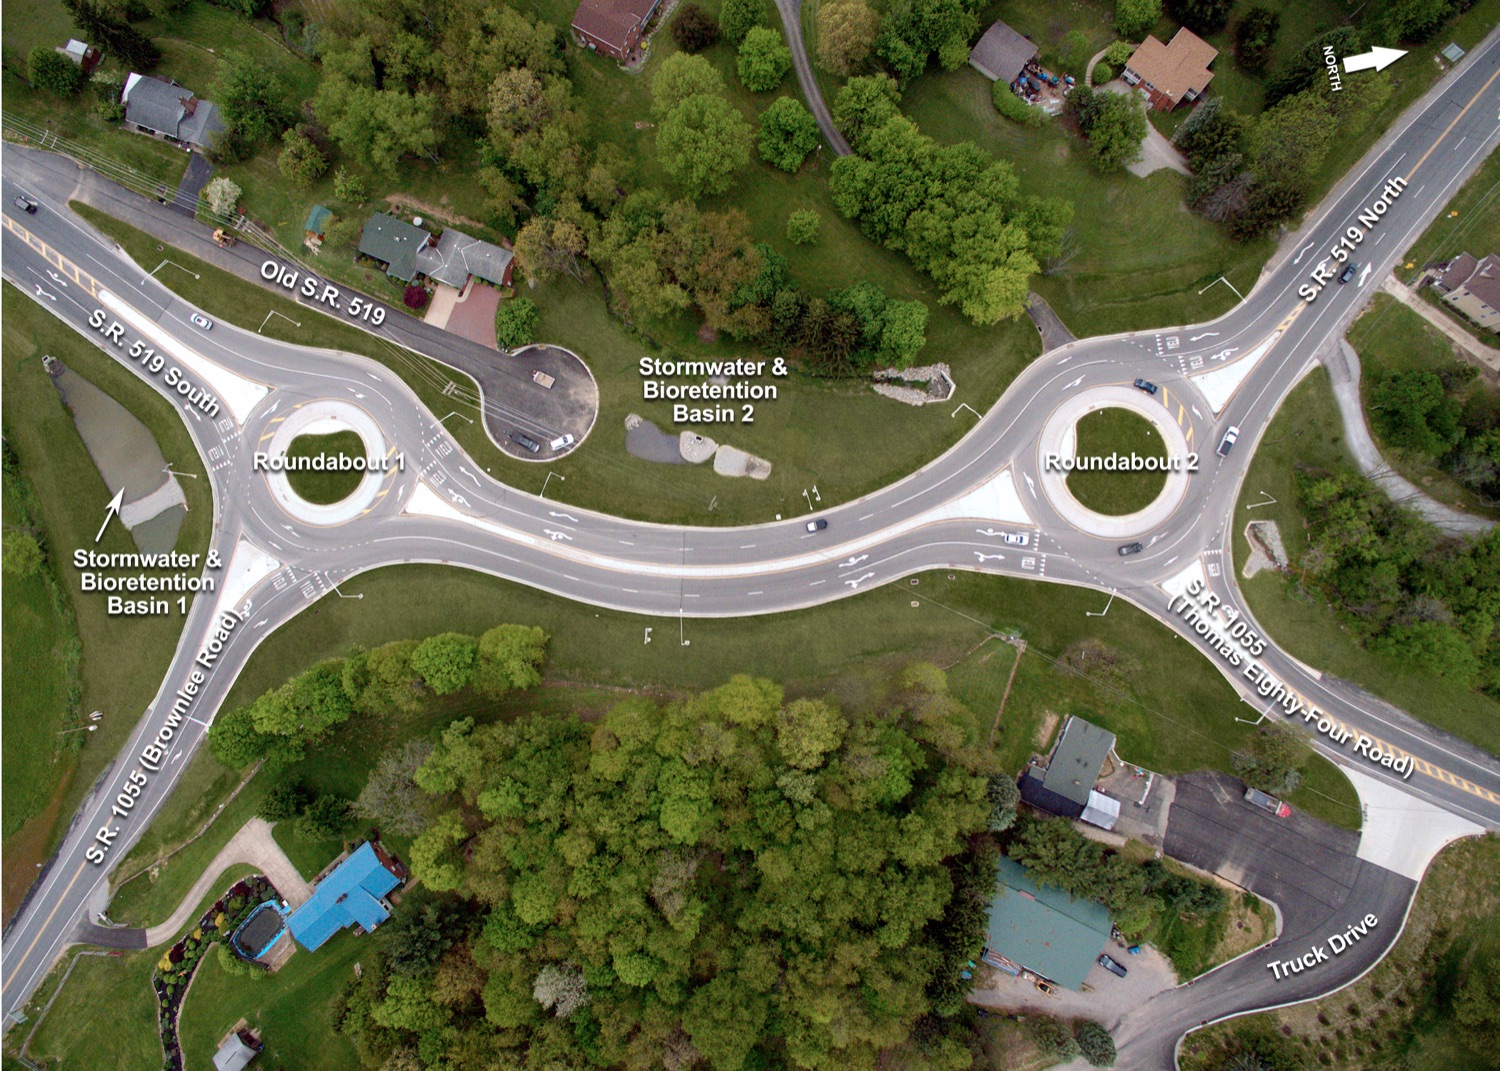 Route 519 (two connected roundabouts) - Route 519 and Brownlee Road, and Route 519 and Thompson Eighty Four Road<br><a href="https://filesource.amperwave.net/commonwealthofpa/photo/22209_dot_roundabout_photo_17.jpg" target="_blank">⇣ Download Photo</a>